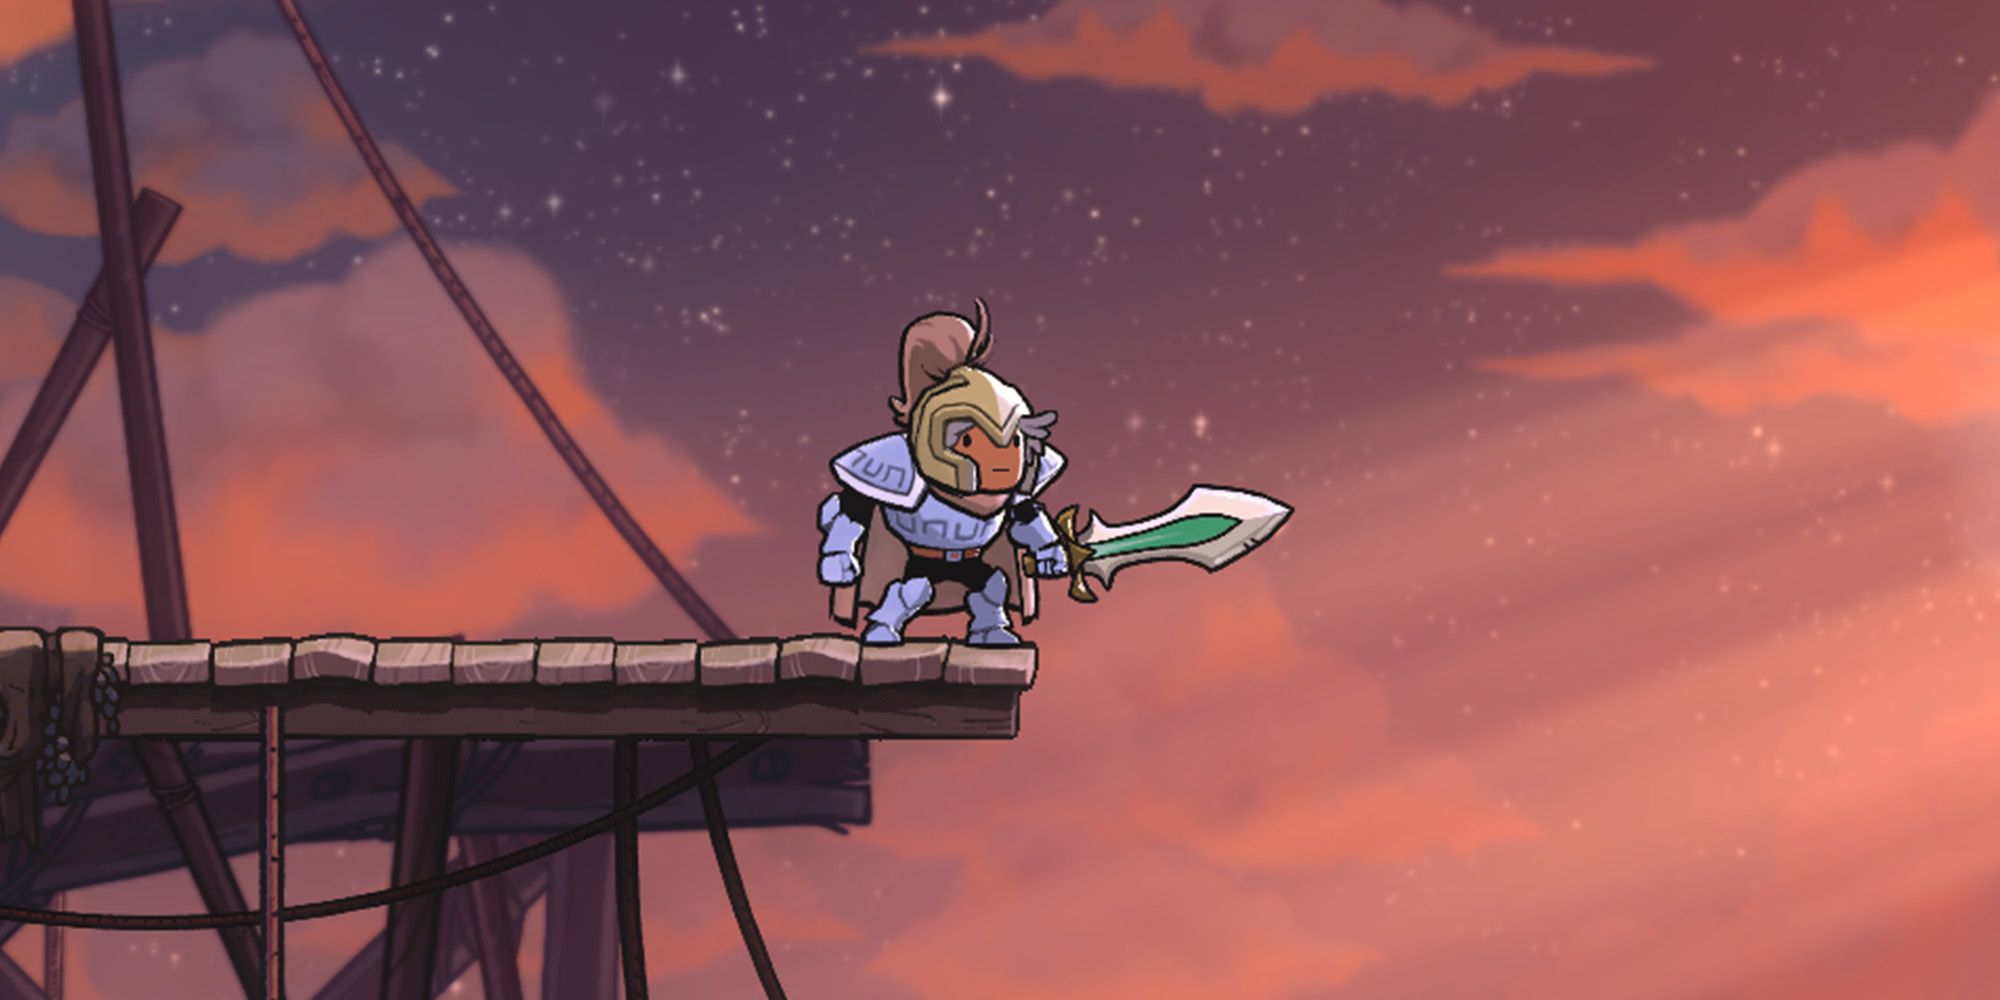 Rogue Legacy 2 screenshot of Knight standing on a wood platform in front of an evening sky